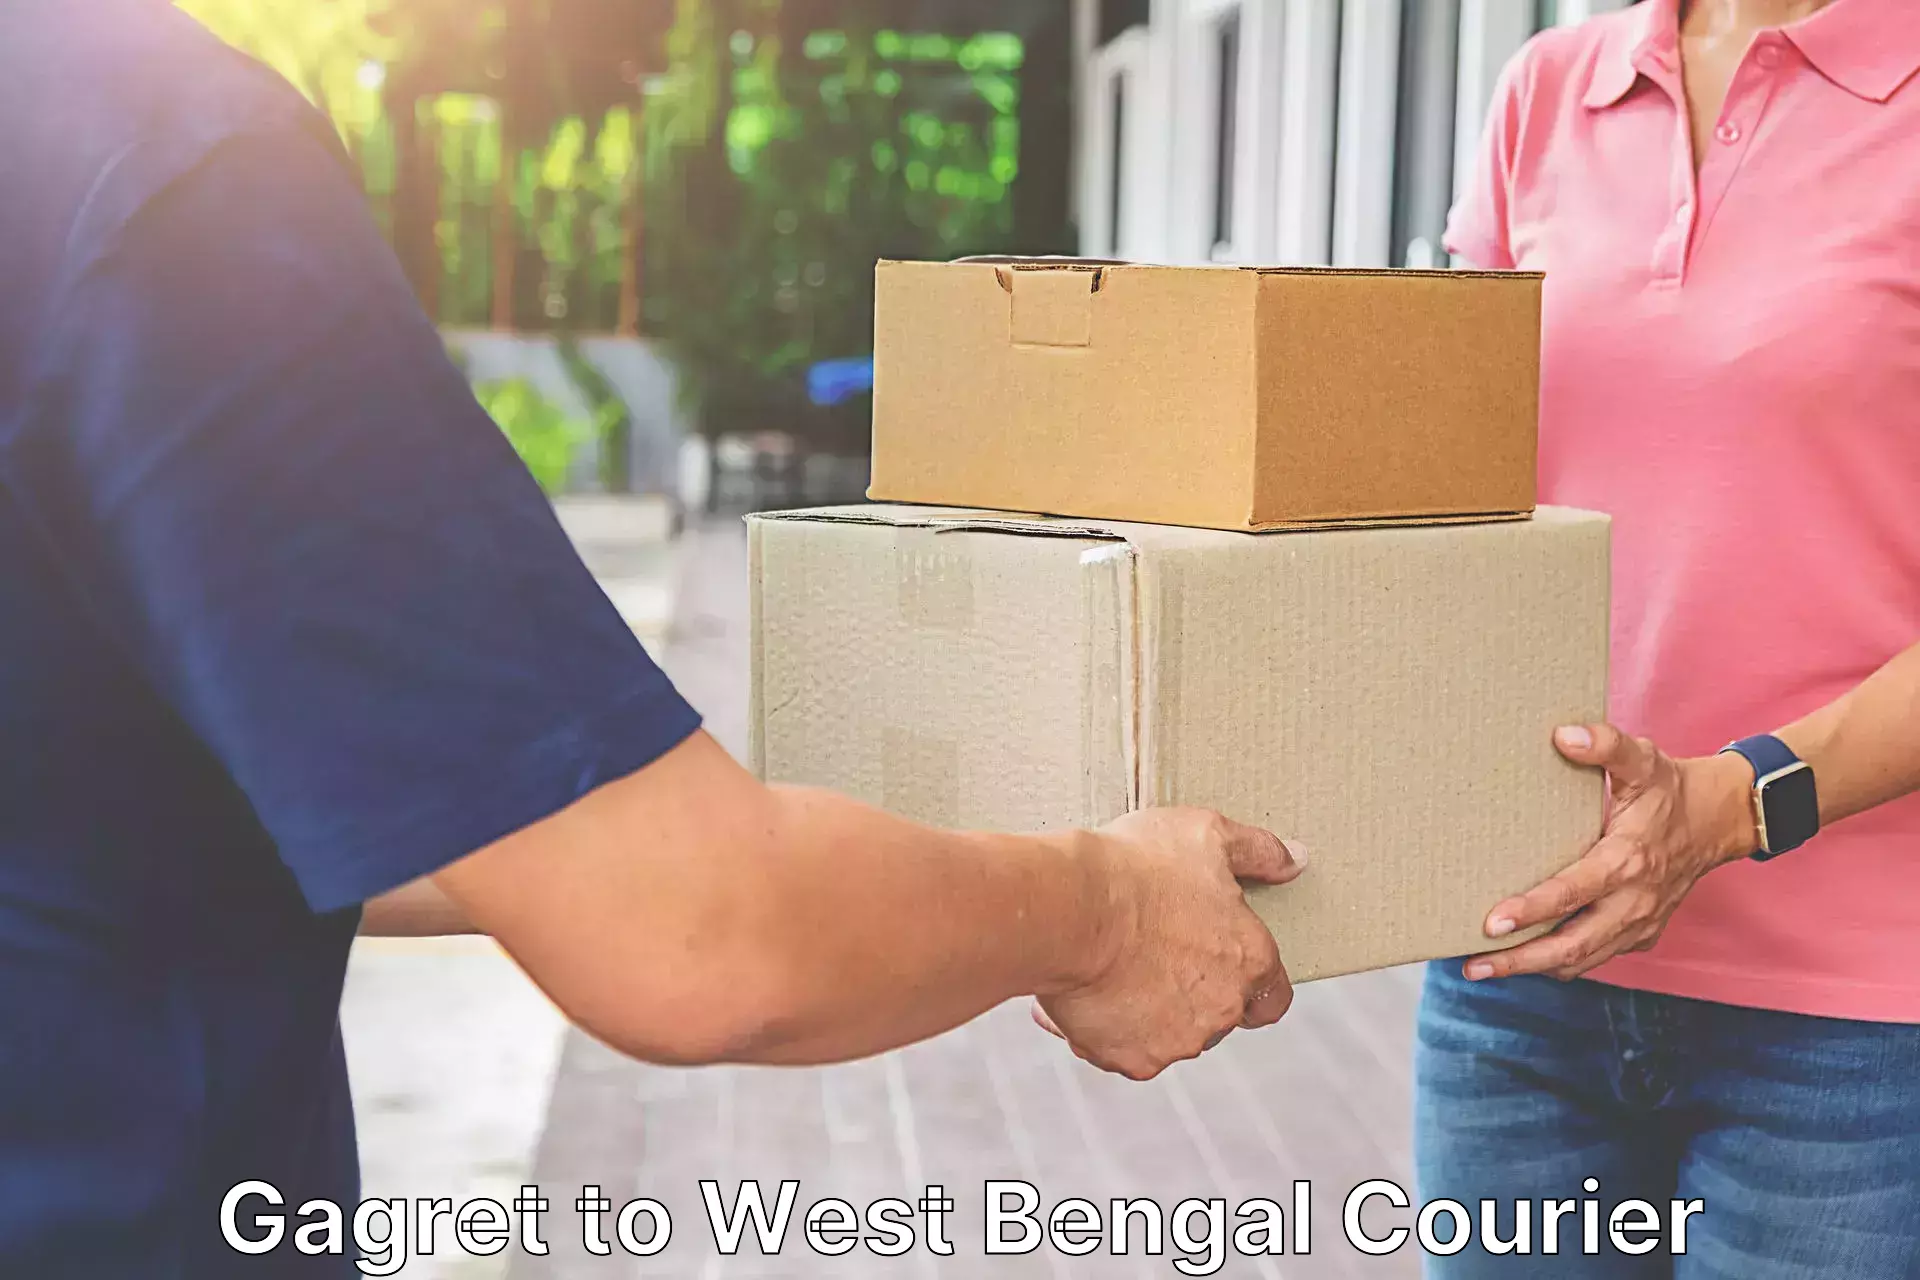 Customizable shipping options Gagret to West Bengal